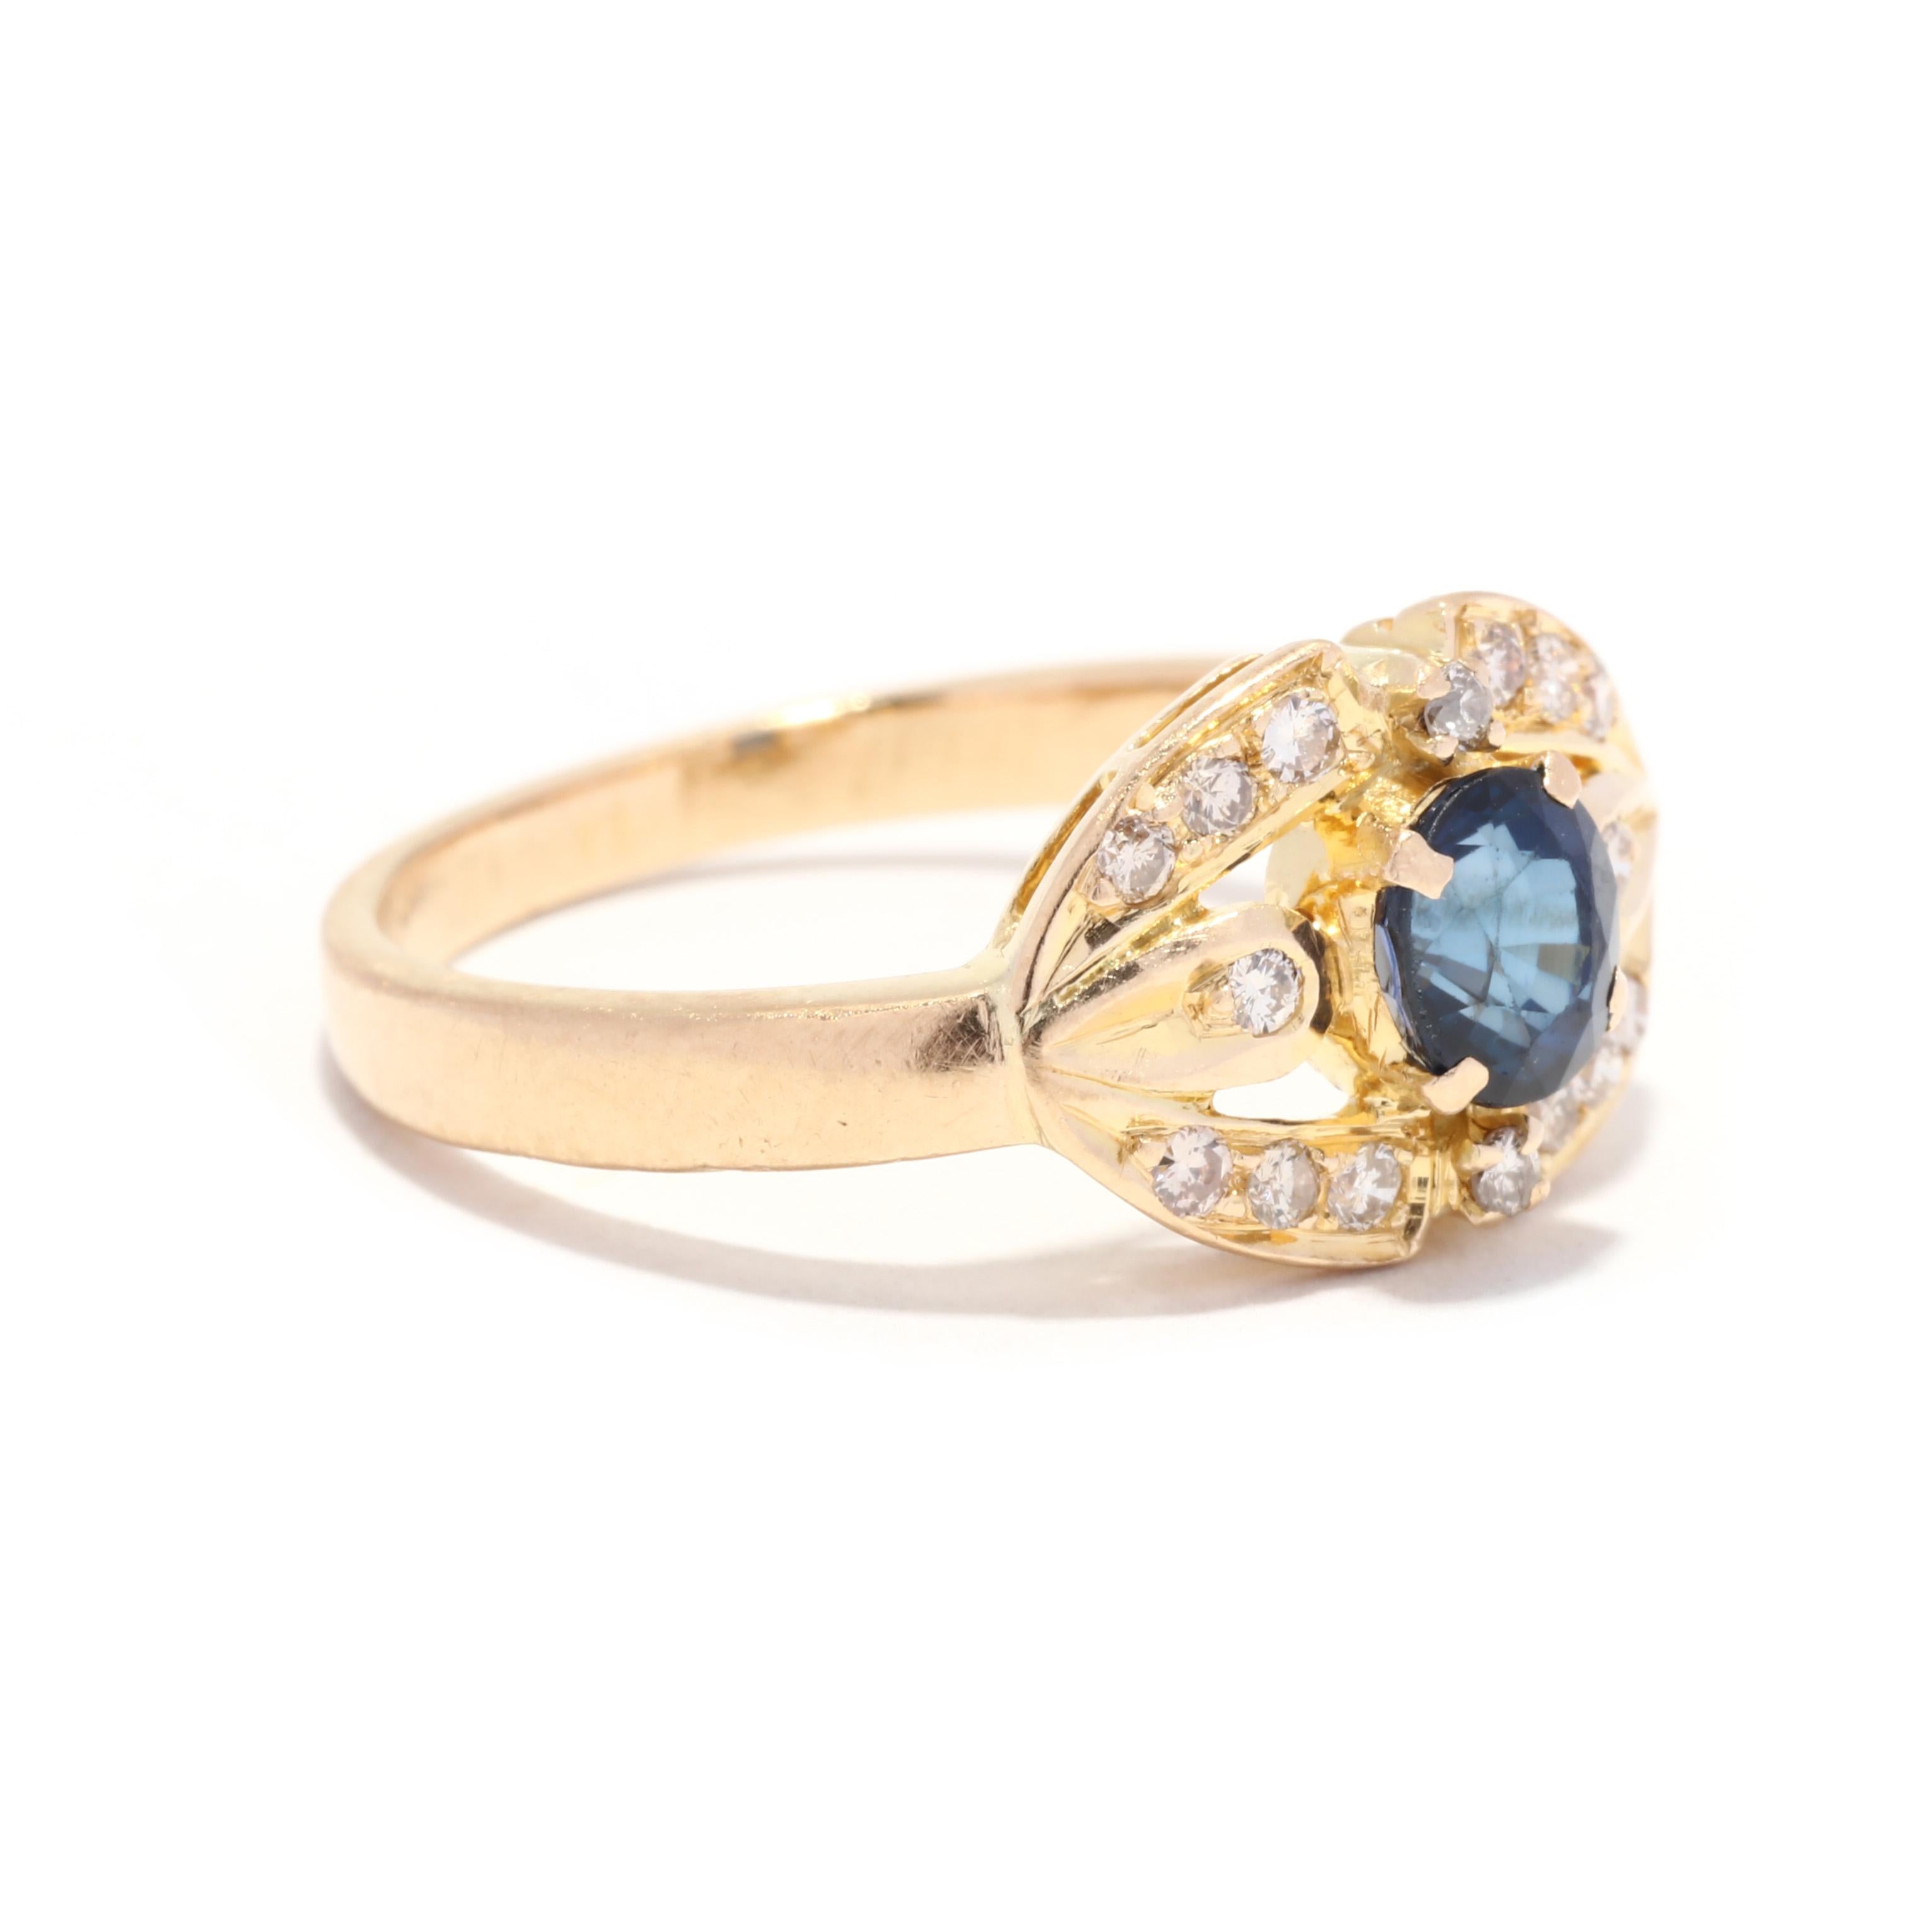 A vintage 18 karat yellow gold sapphire and diamond cocktail ring. This September birthstone ring features a prong set, oval cut sapphire weighing approximately .50 carat set in an open horizontal navette shape mounting set with round brilliant cut